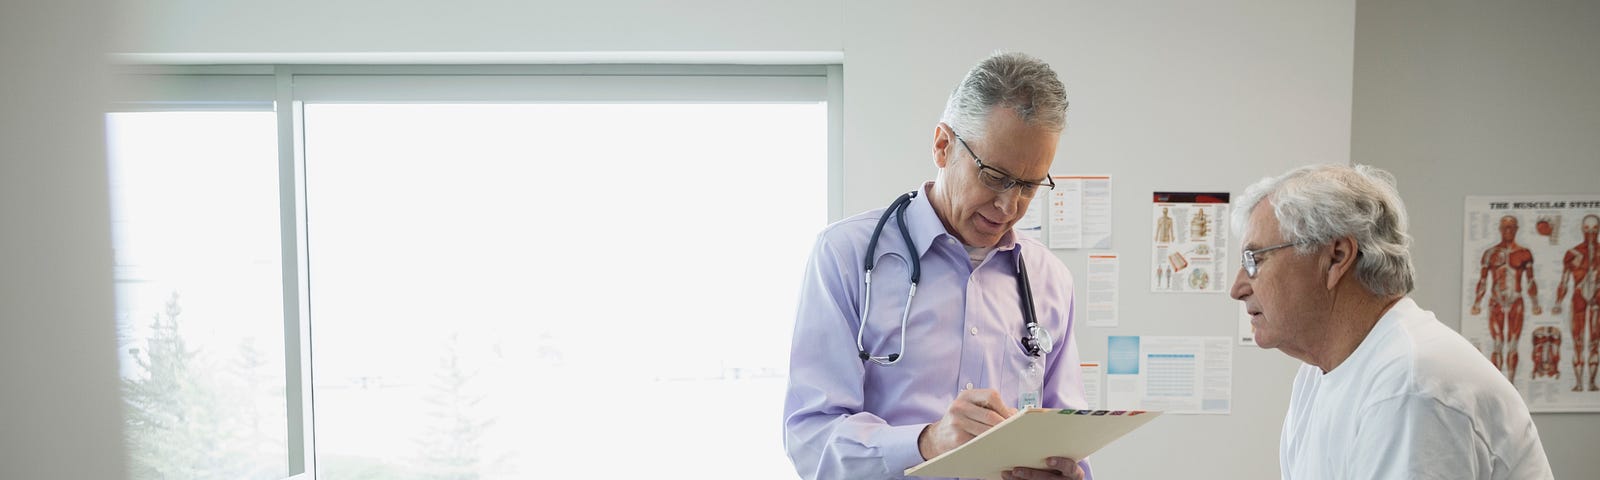 A doctor reviews the medical chart of a senior male patient.